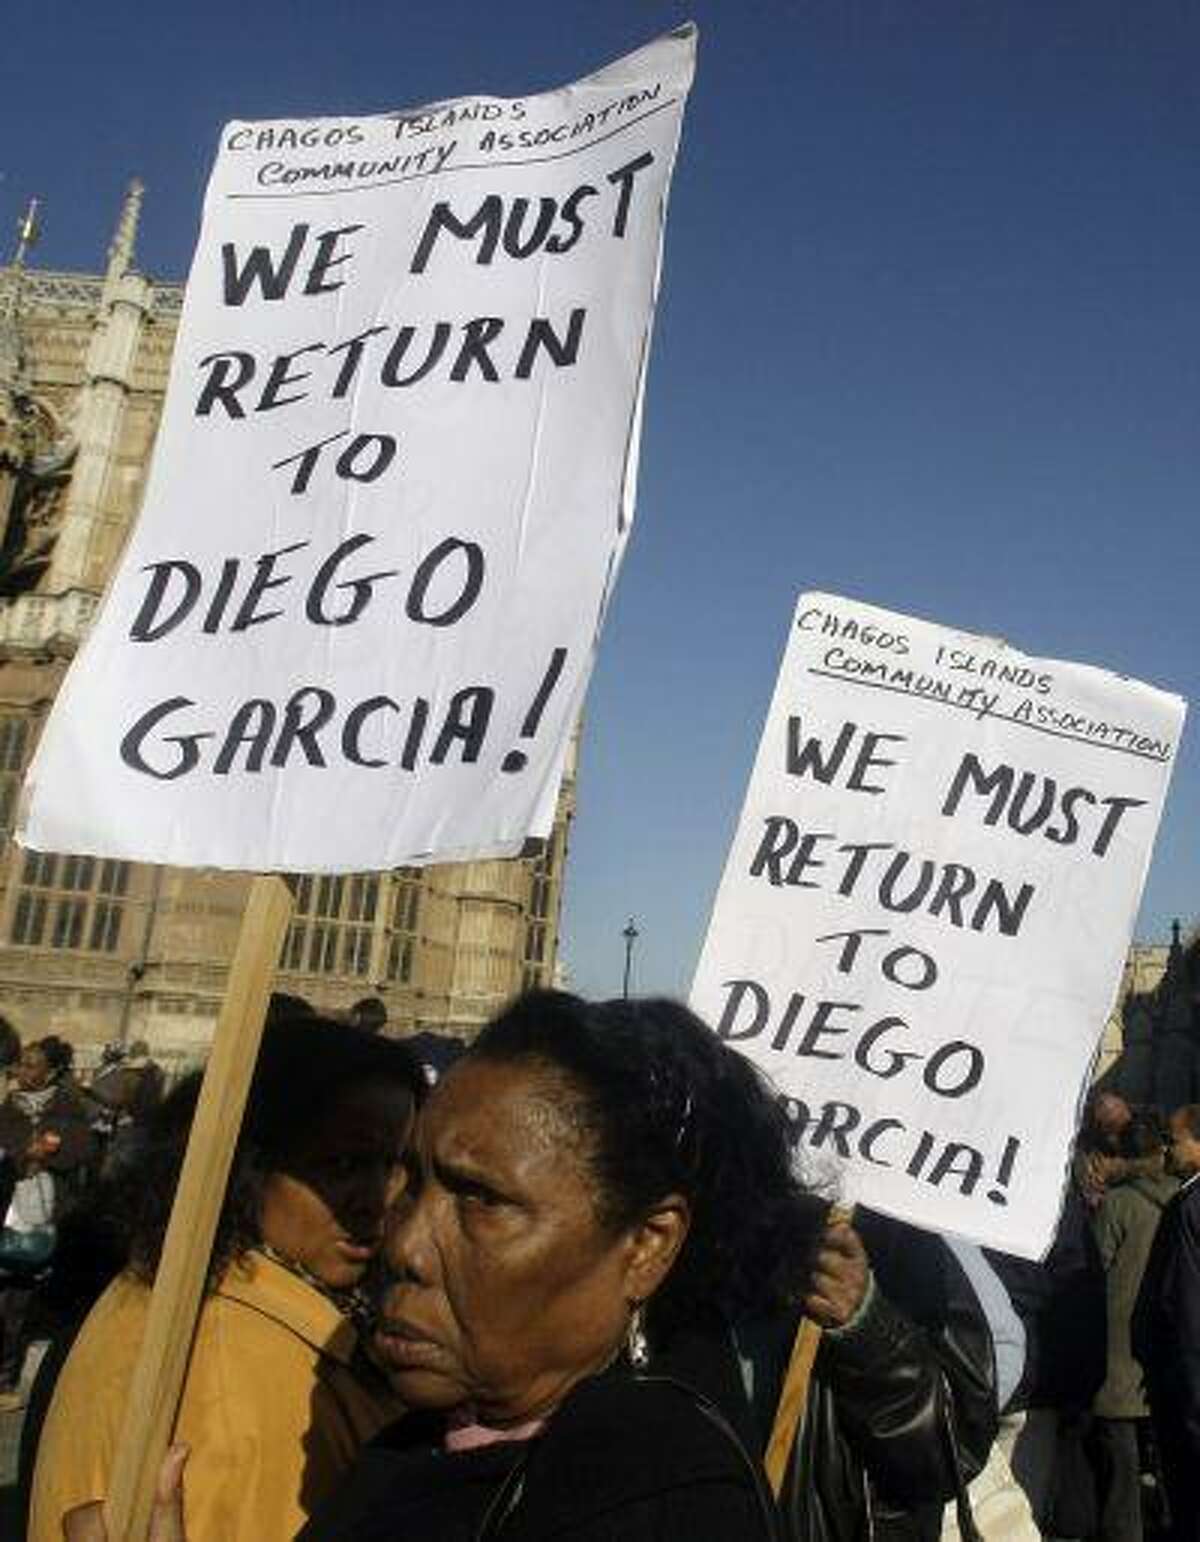 Women take part in a protest outside the Houses of Parliament in London, after a court ruling decided Chagos Islanders are not allowed to return to their homeland, Wednesday Oct. 22, 2008.